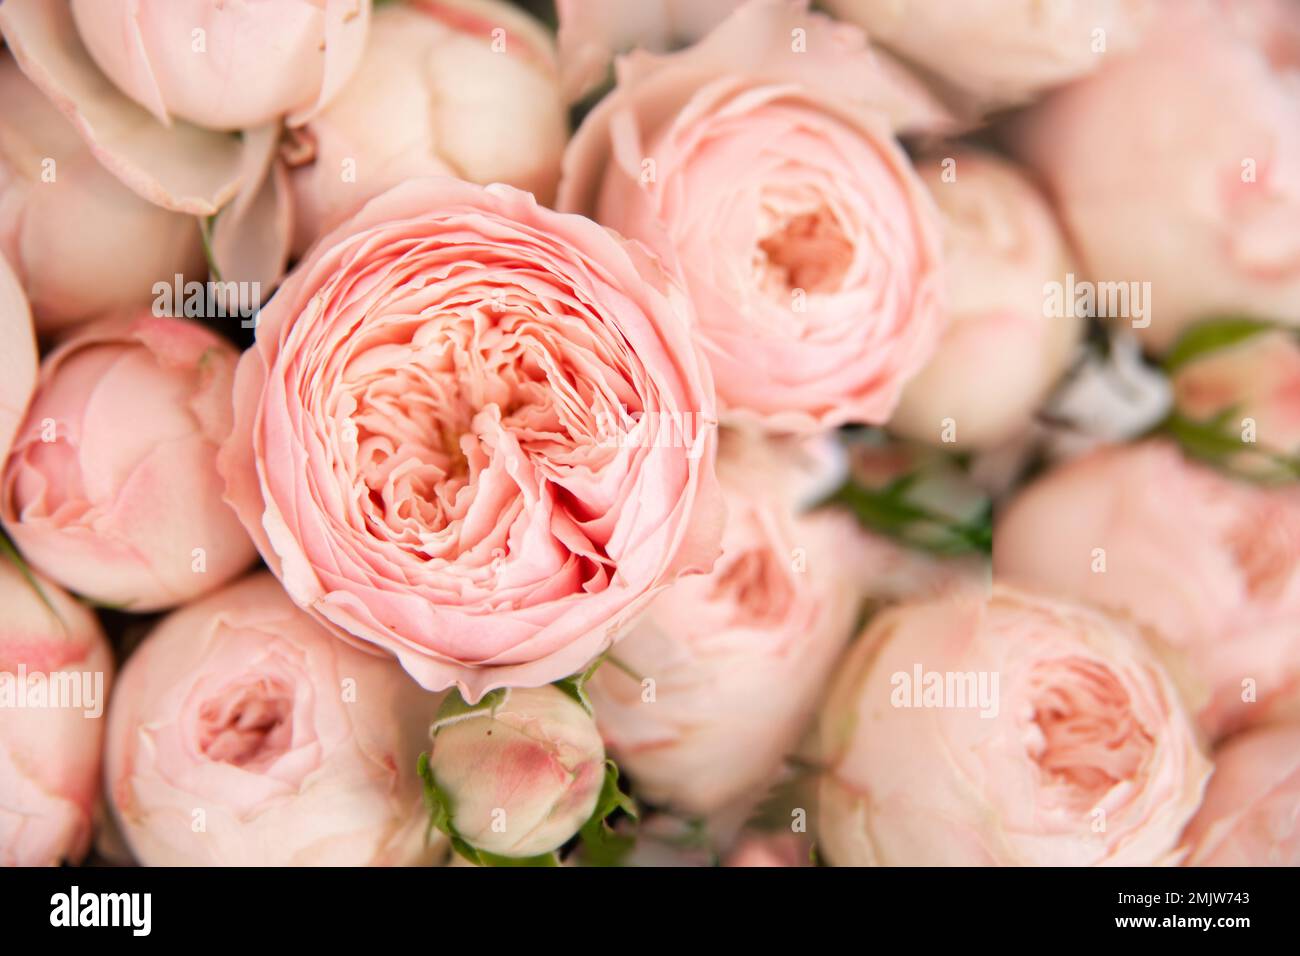 delicate flowers for bridal wedding bouquet - David Austin Roses. selective focus on open bud on blurred background of roses Stock Photo